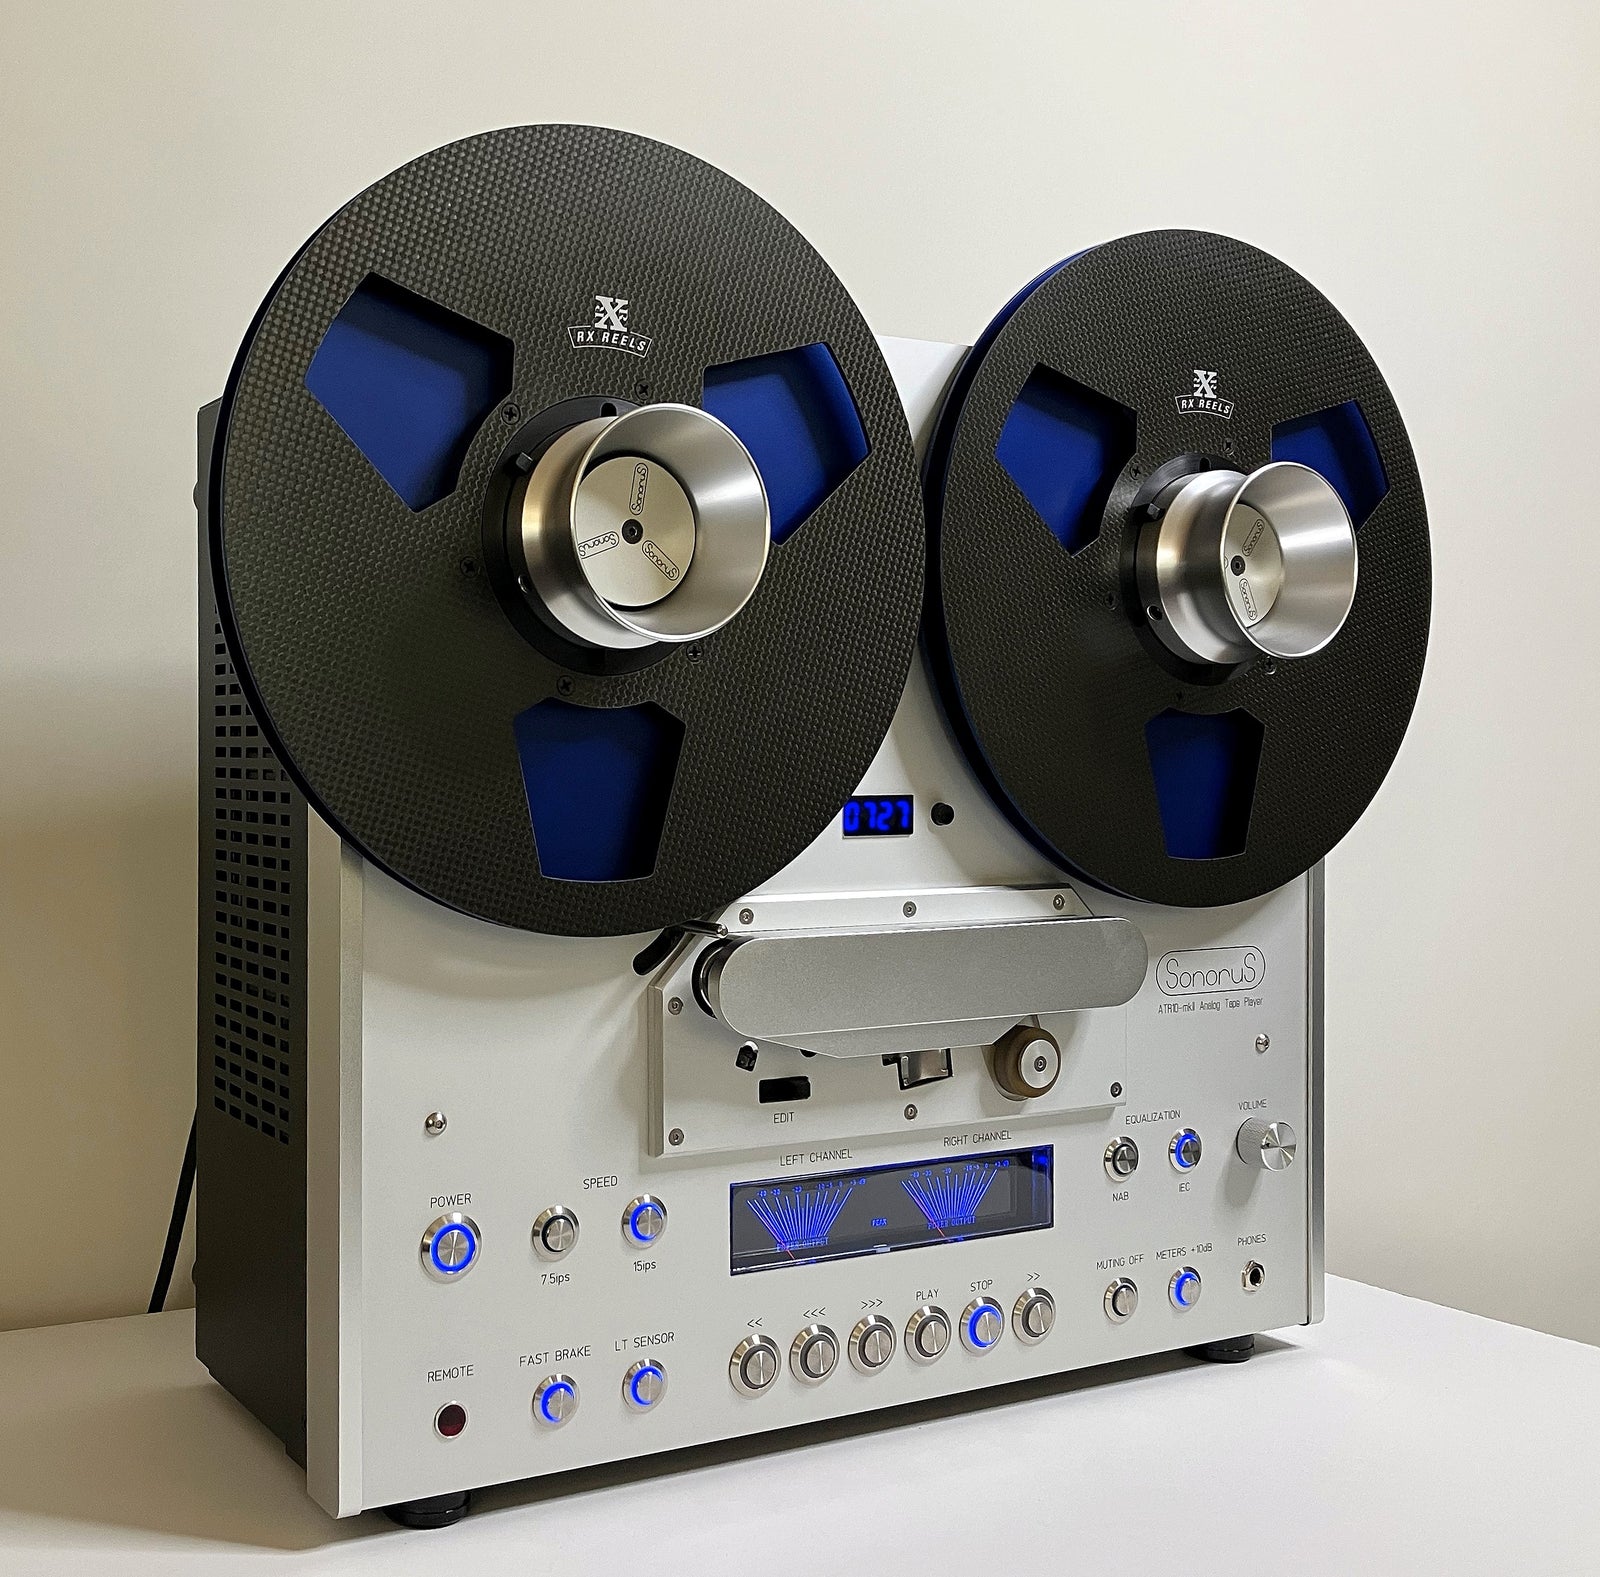 Studer Reel to Reel Players For Sale - RX Reels